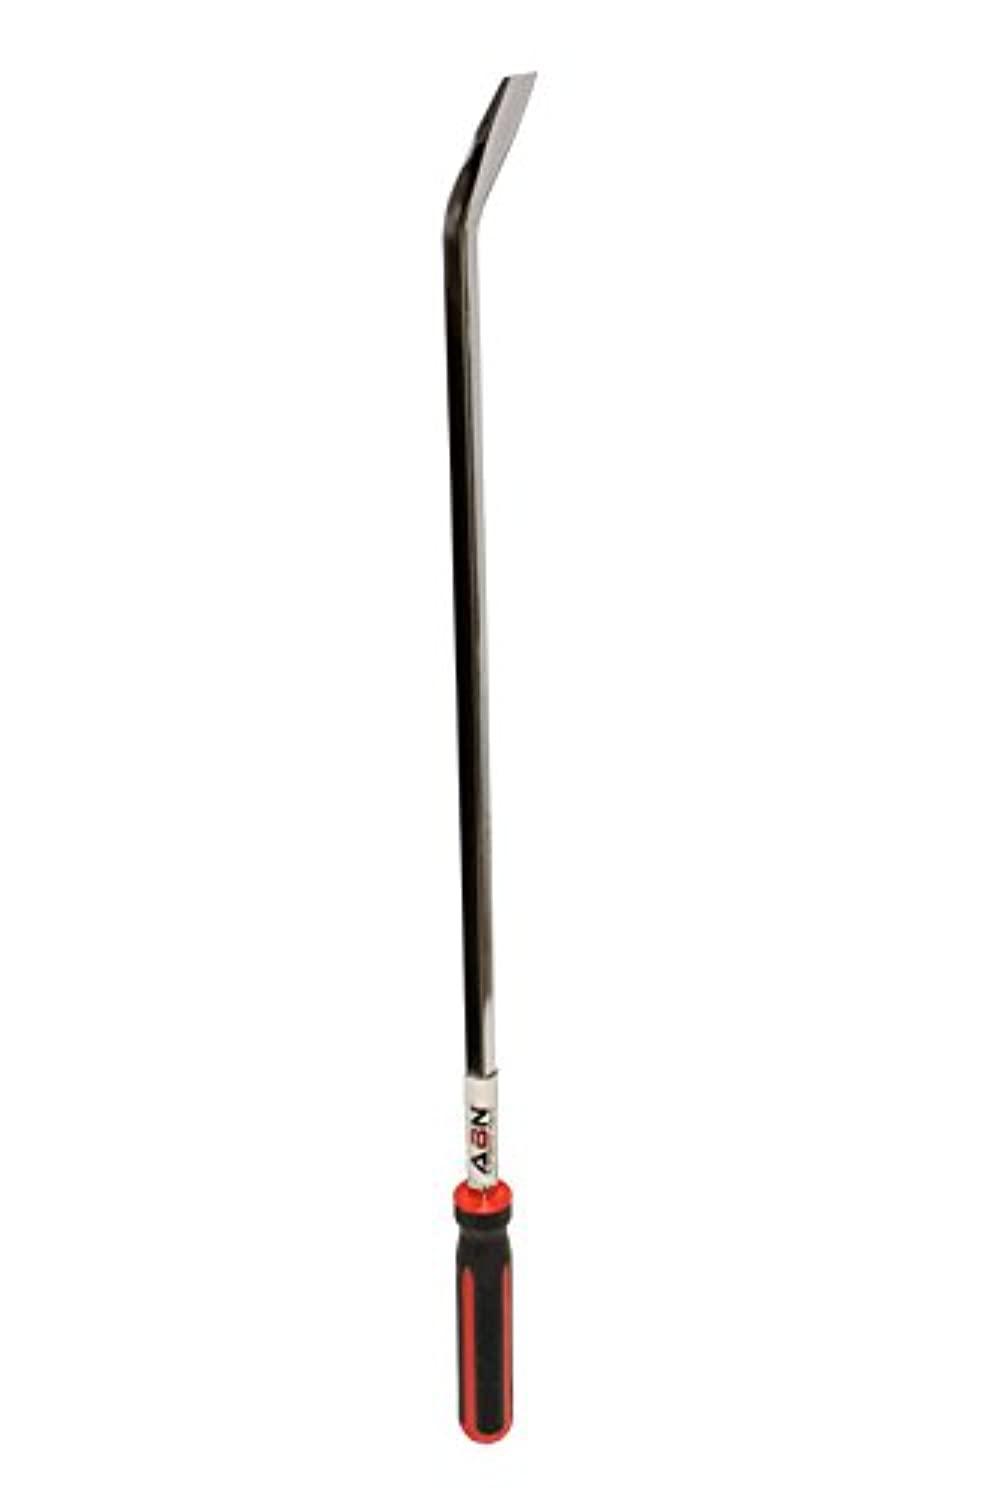 abn jumbo pry bar tool - 36in large breaker crowbar with oversized mechanics handle for heavy-duty automotive prying